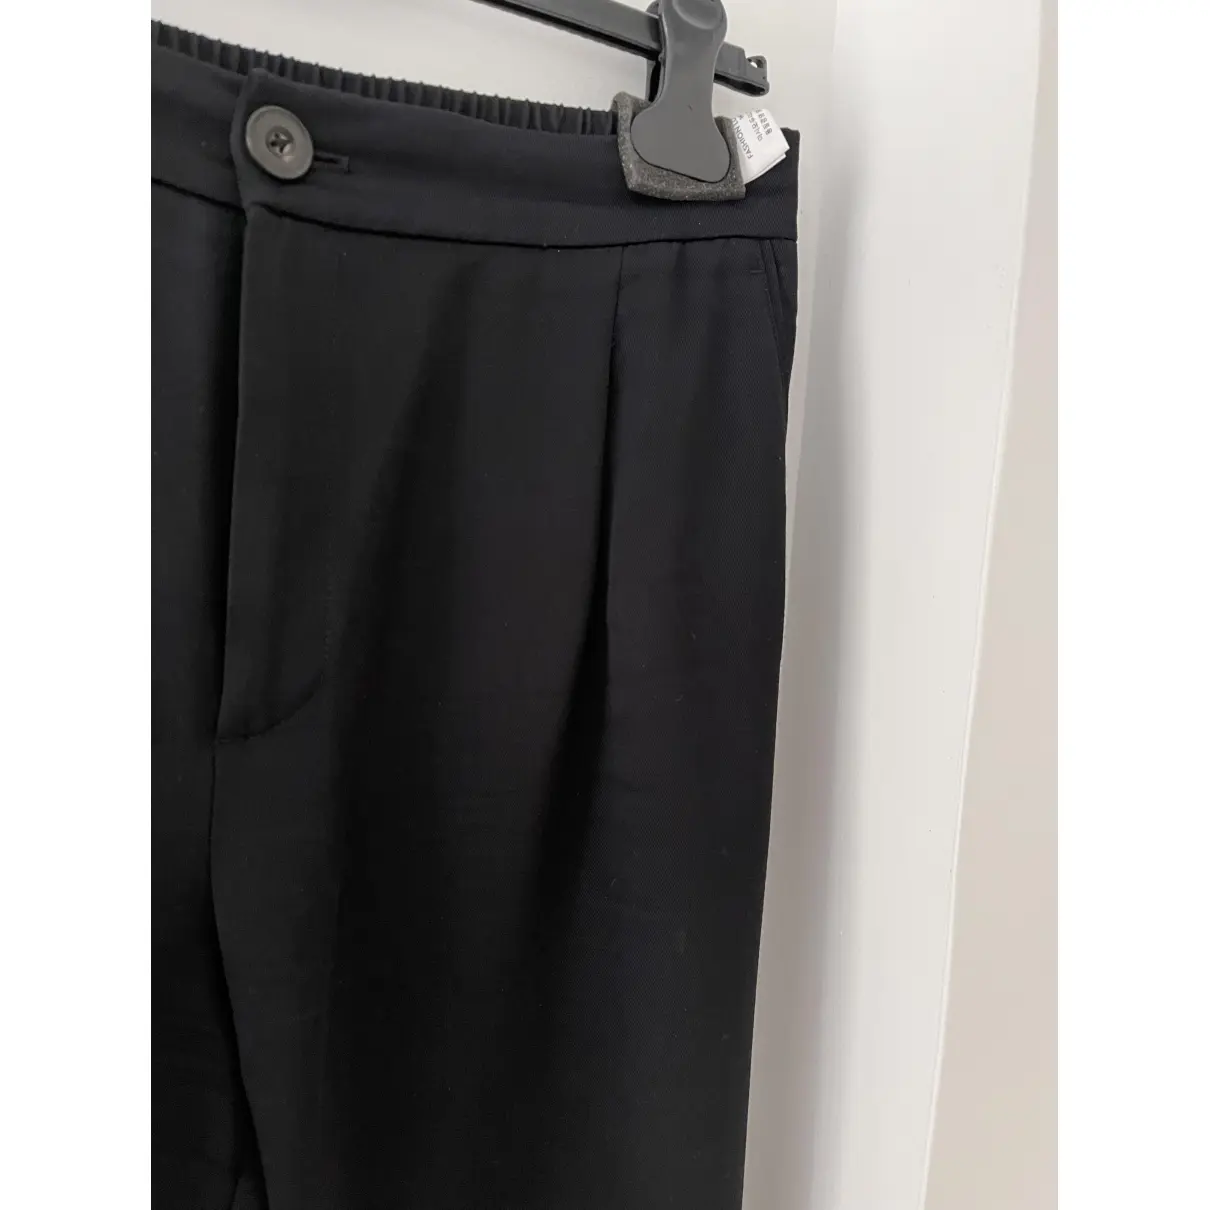 Buy Massimo Dutti Trousers online